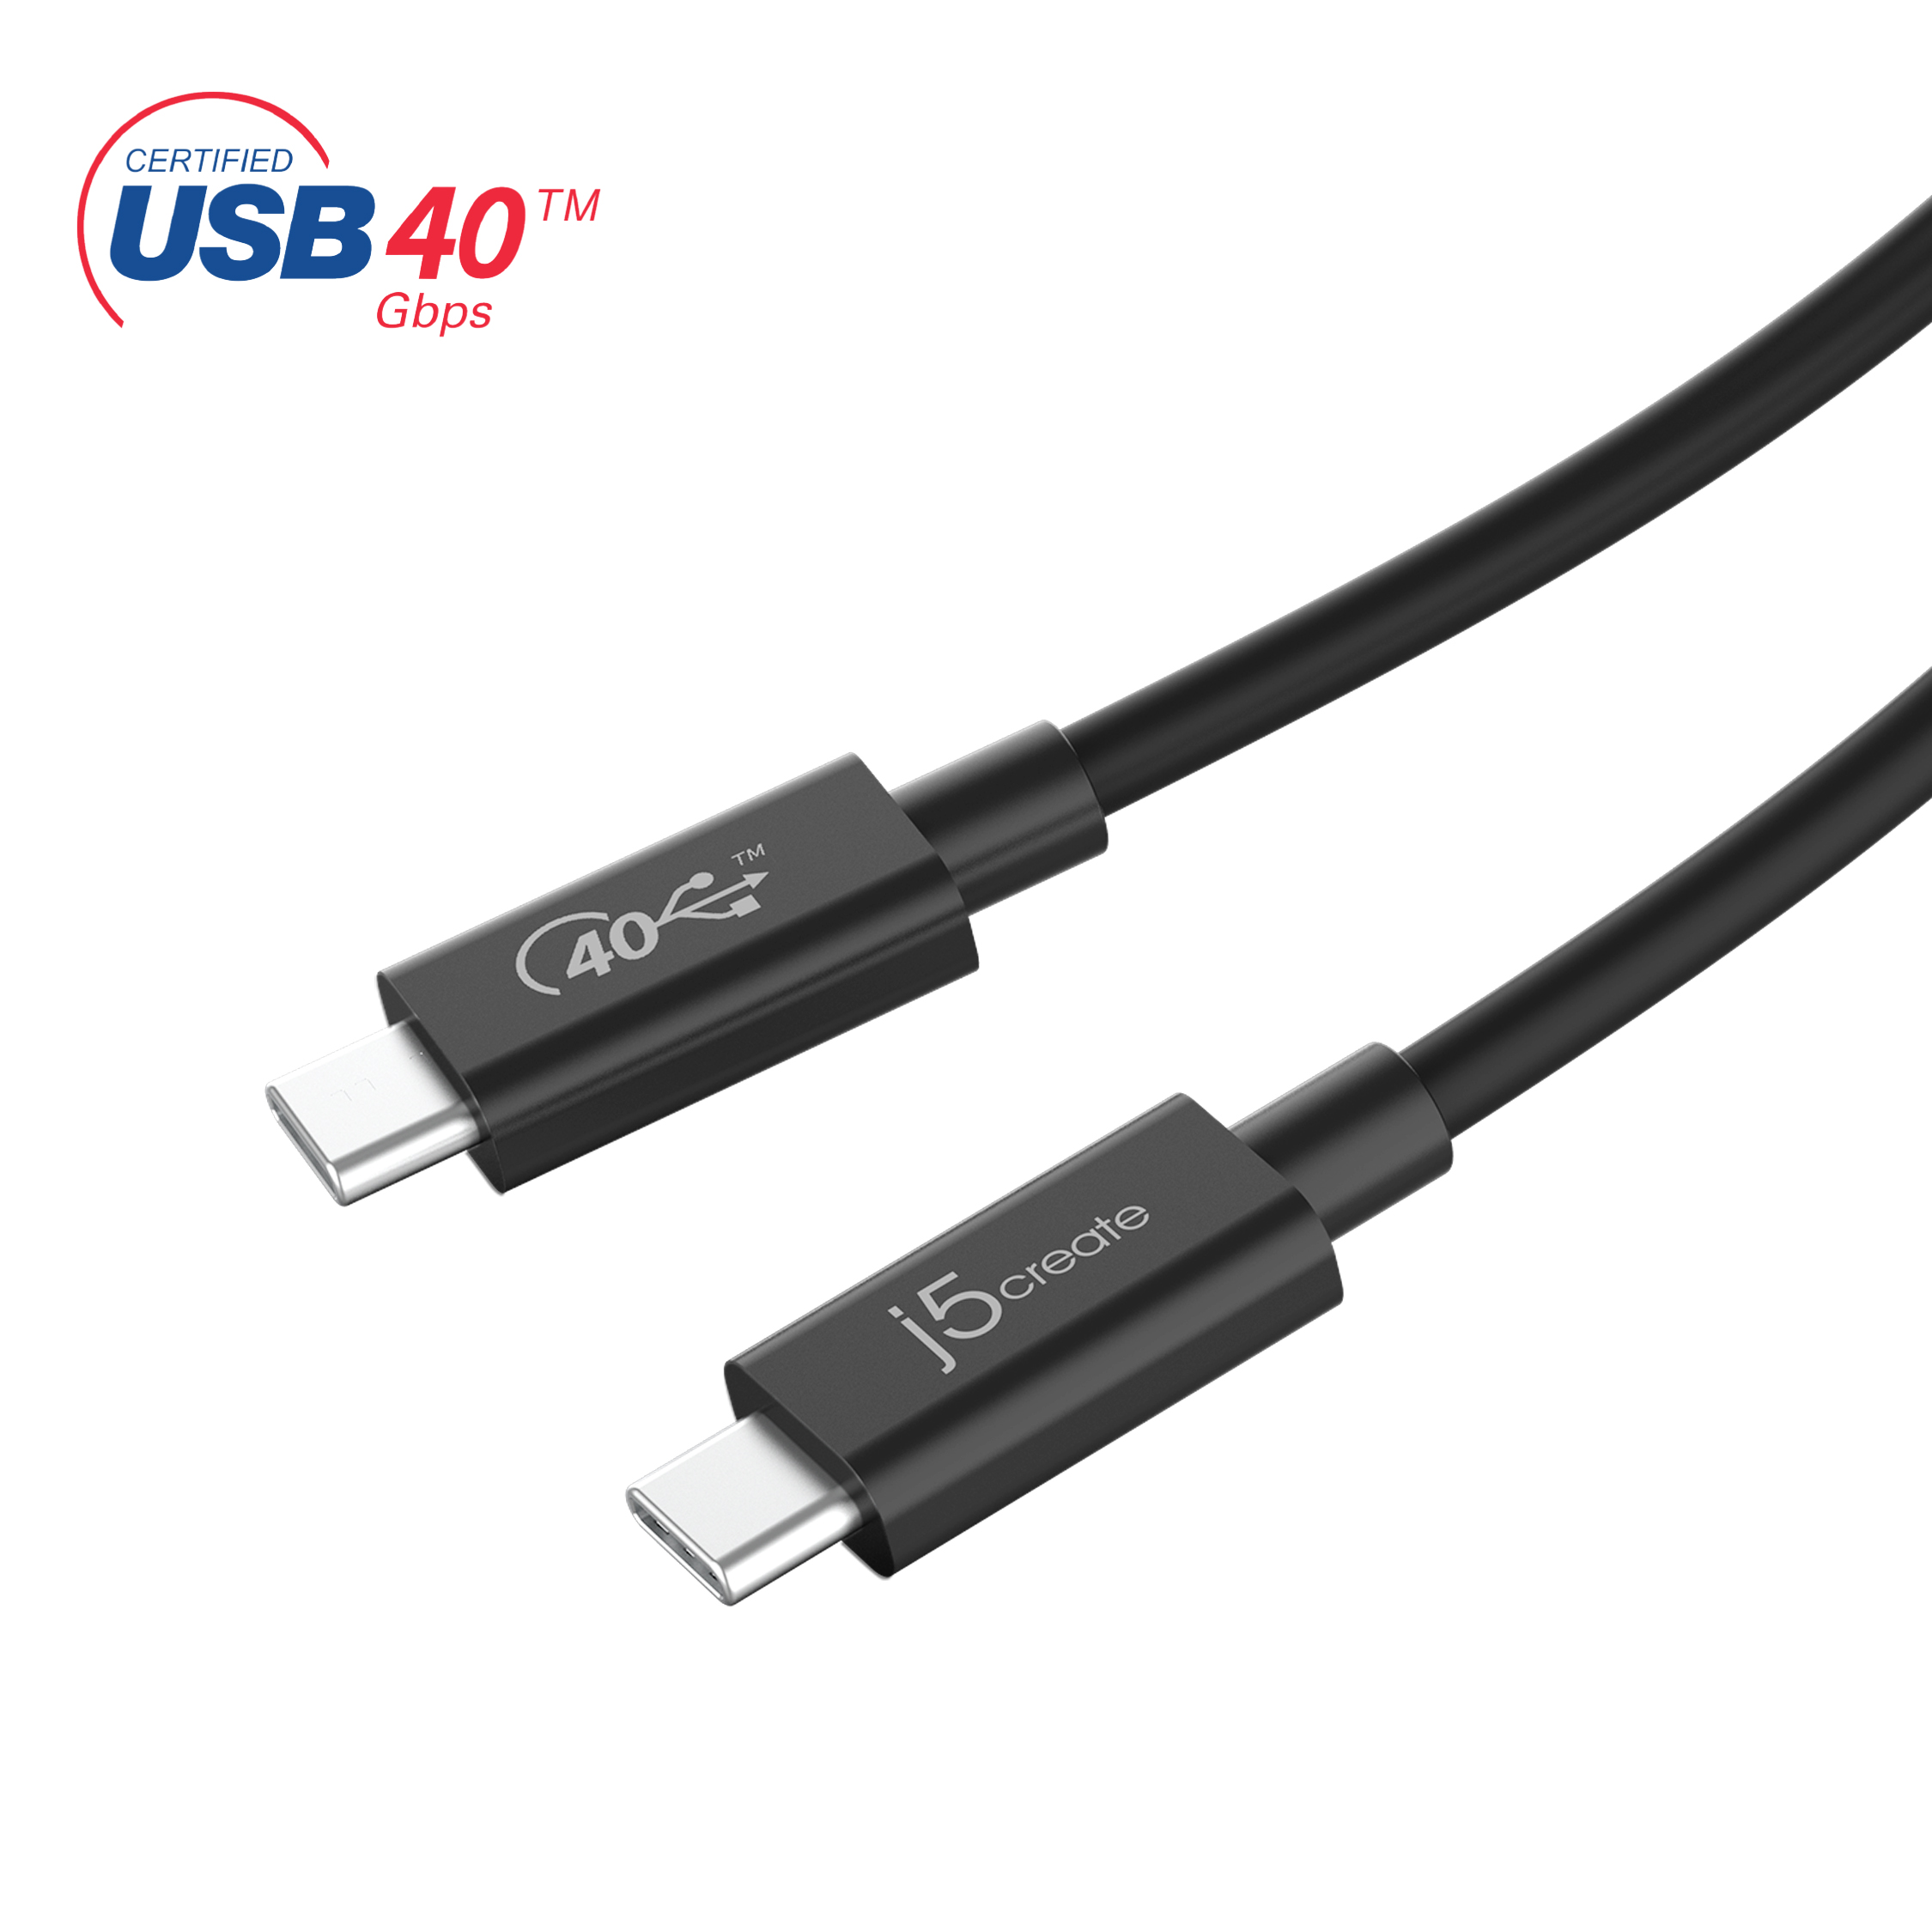 j5create Full-Featured USB-C Cable (USB4 Gen 3), JUC28L08 - image 1 of 8